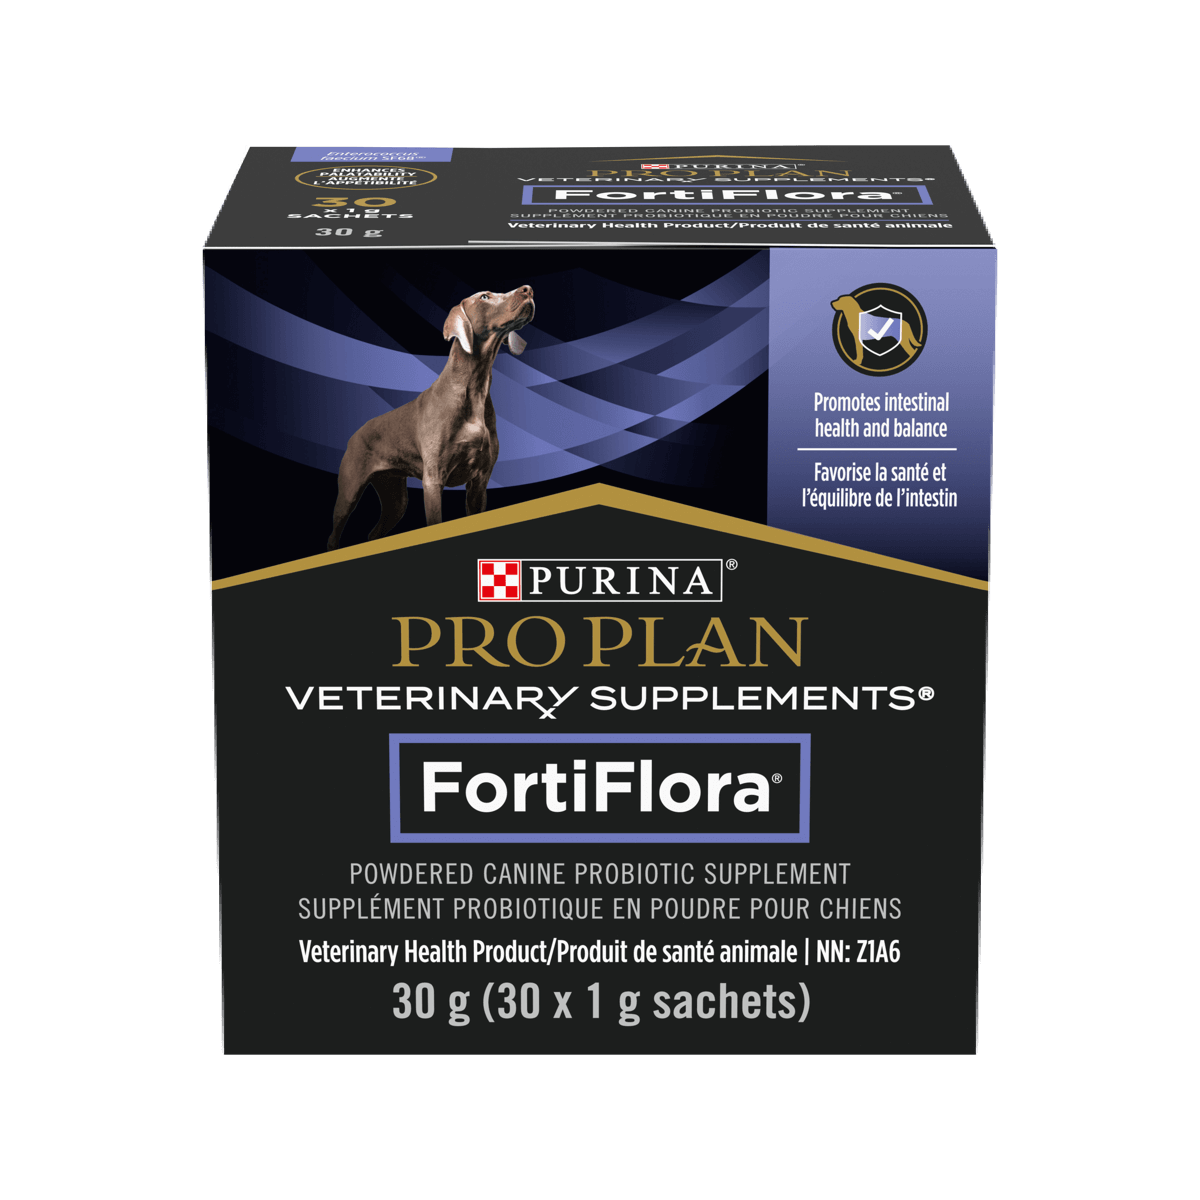 Purina Fortiflora Canine (30 - 1g packets )